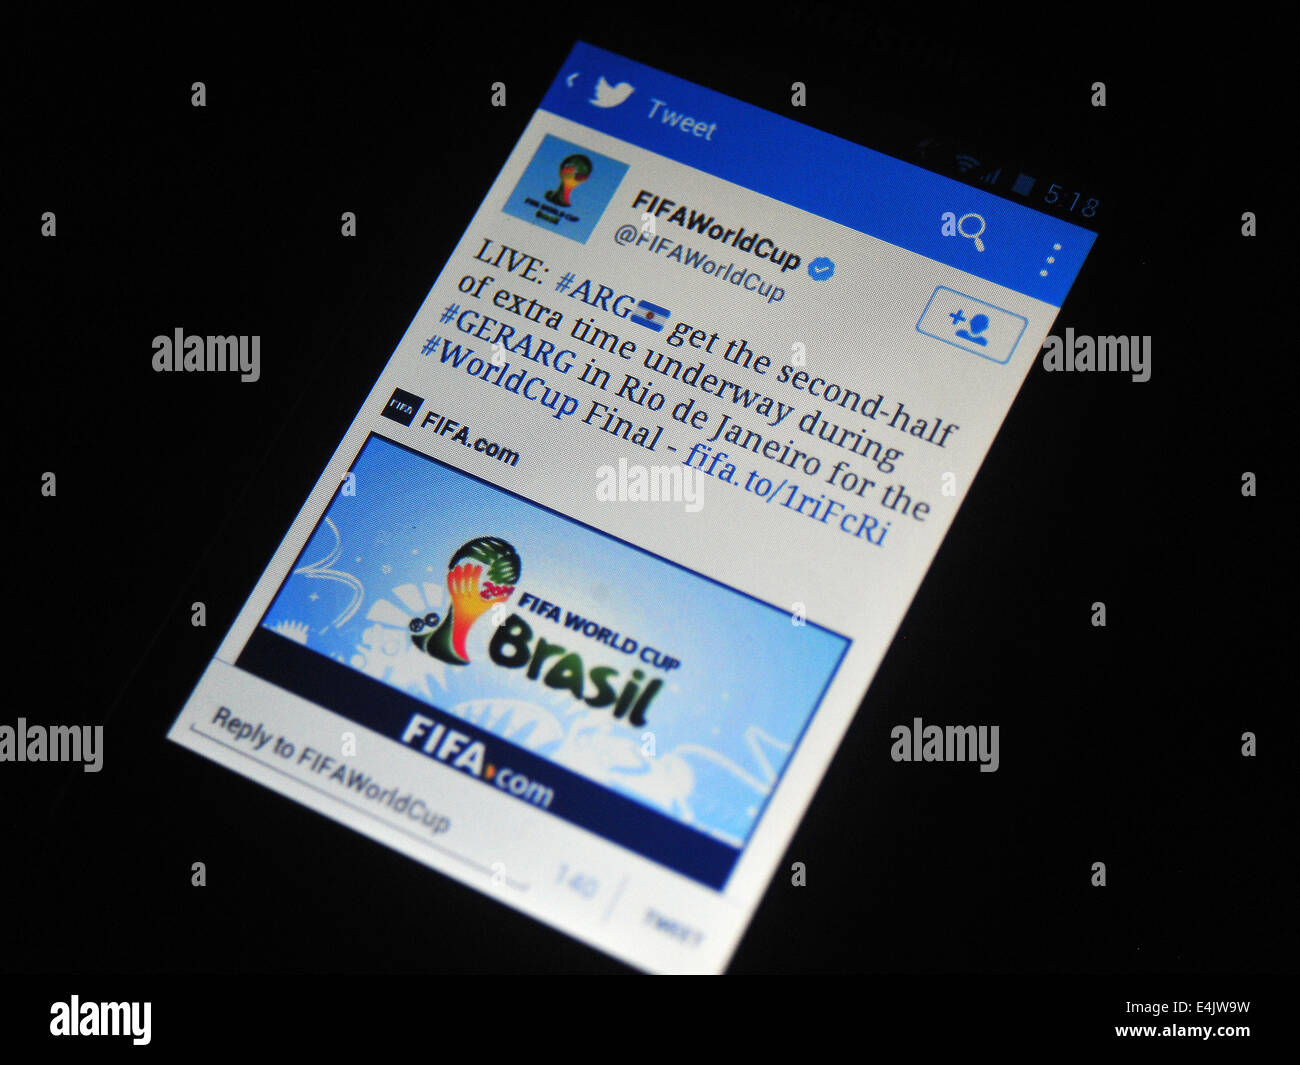 Tweets during the 2014 FIFA World Cup Final between Argentina and Germany. Stock Photo